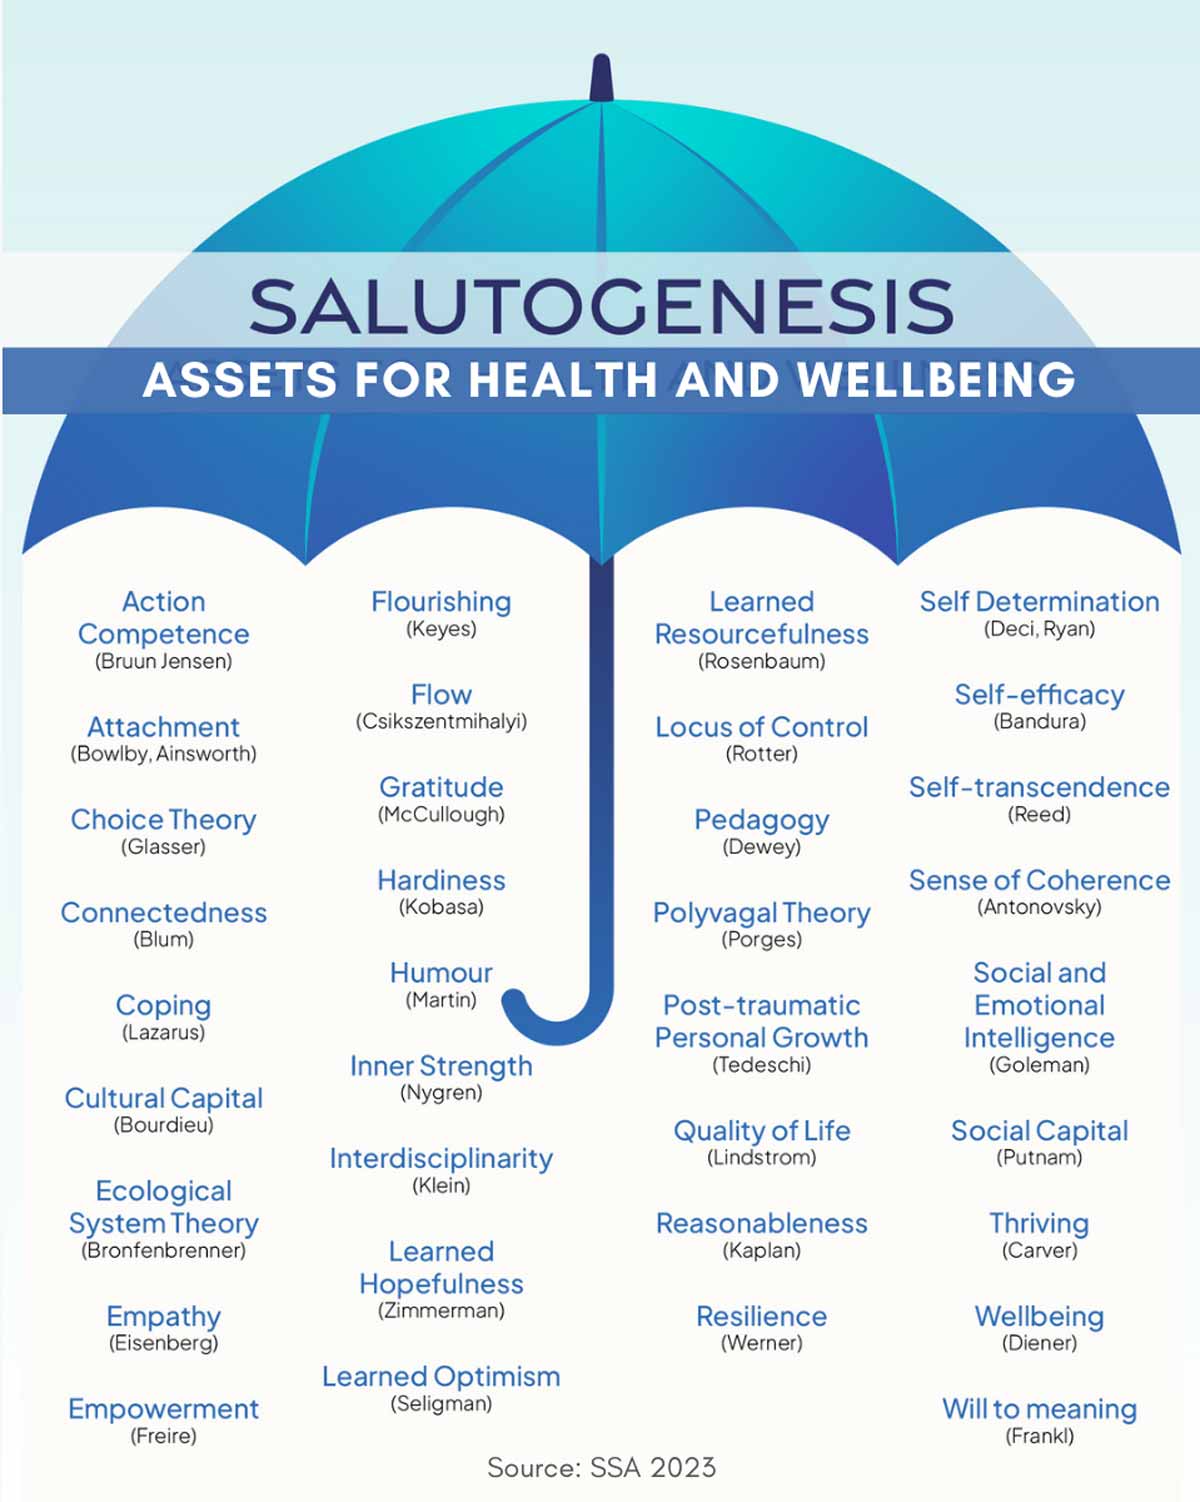 A salutogenic approach to wellbeing